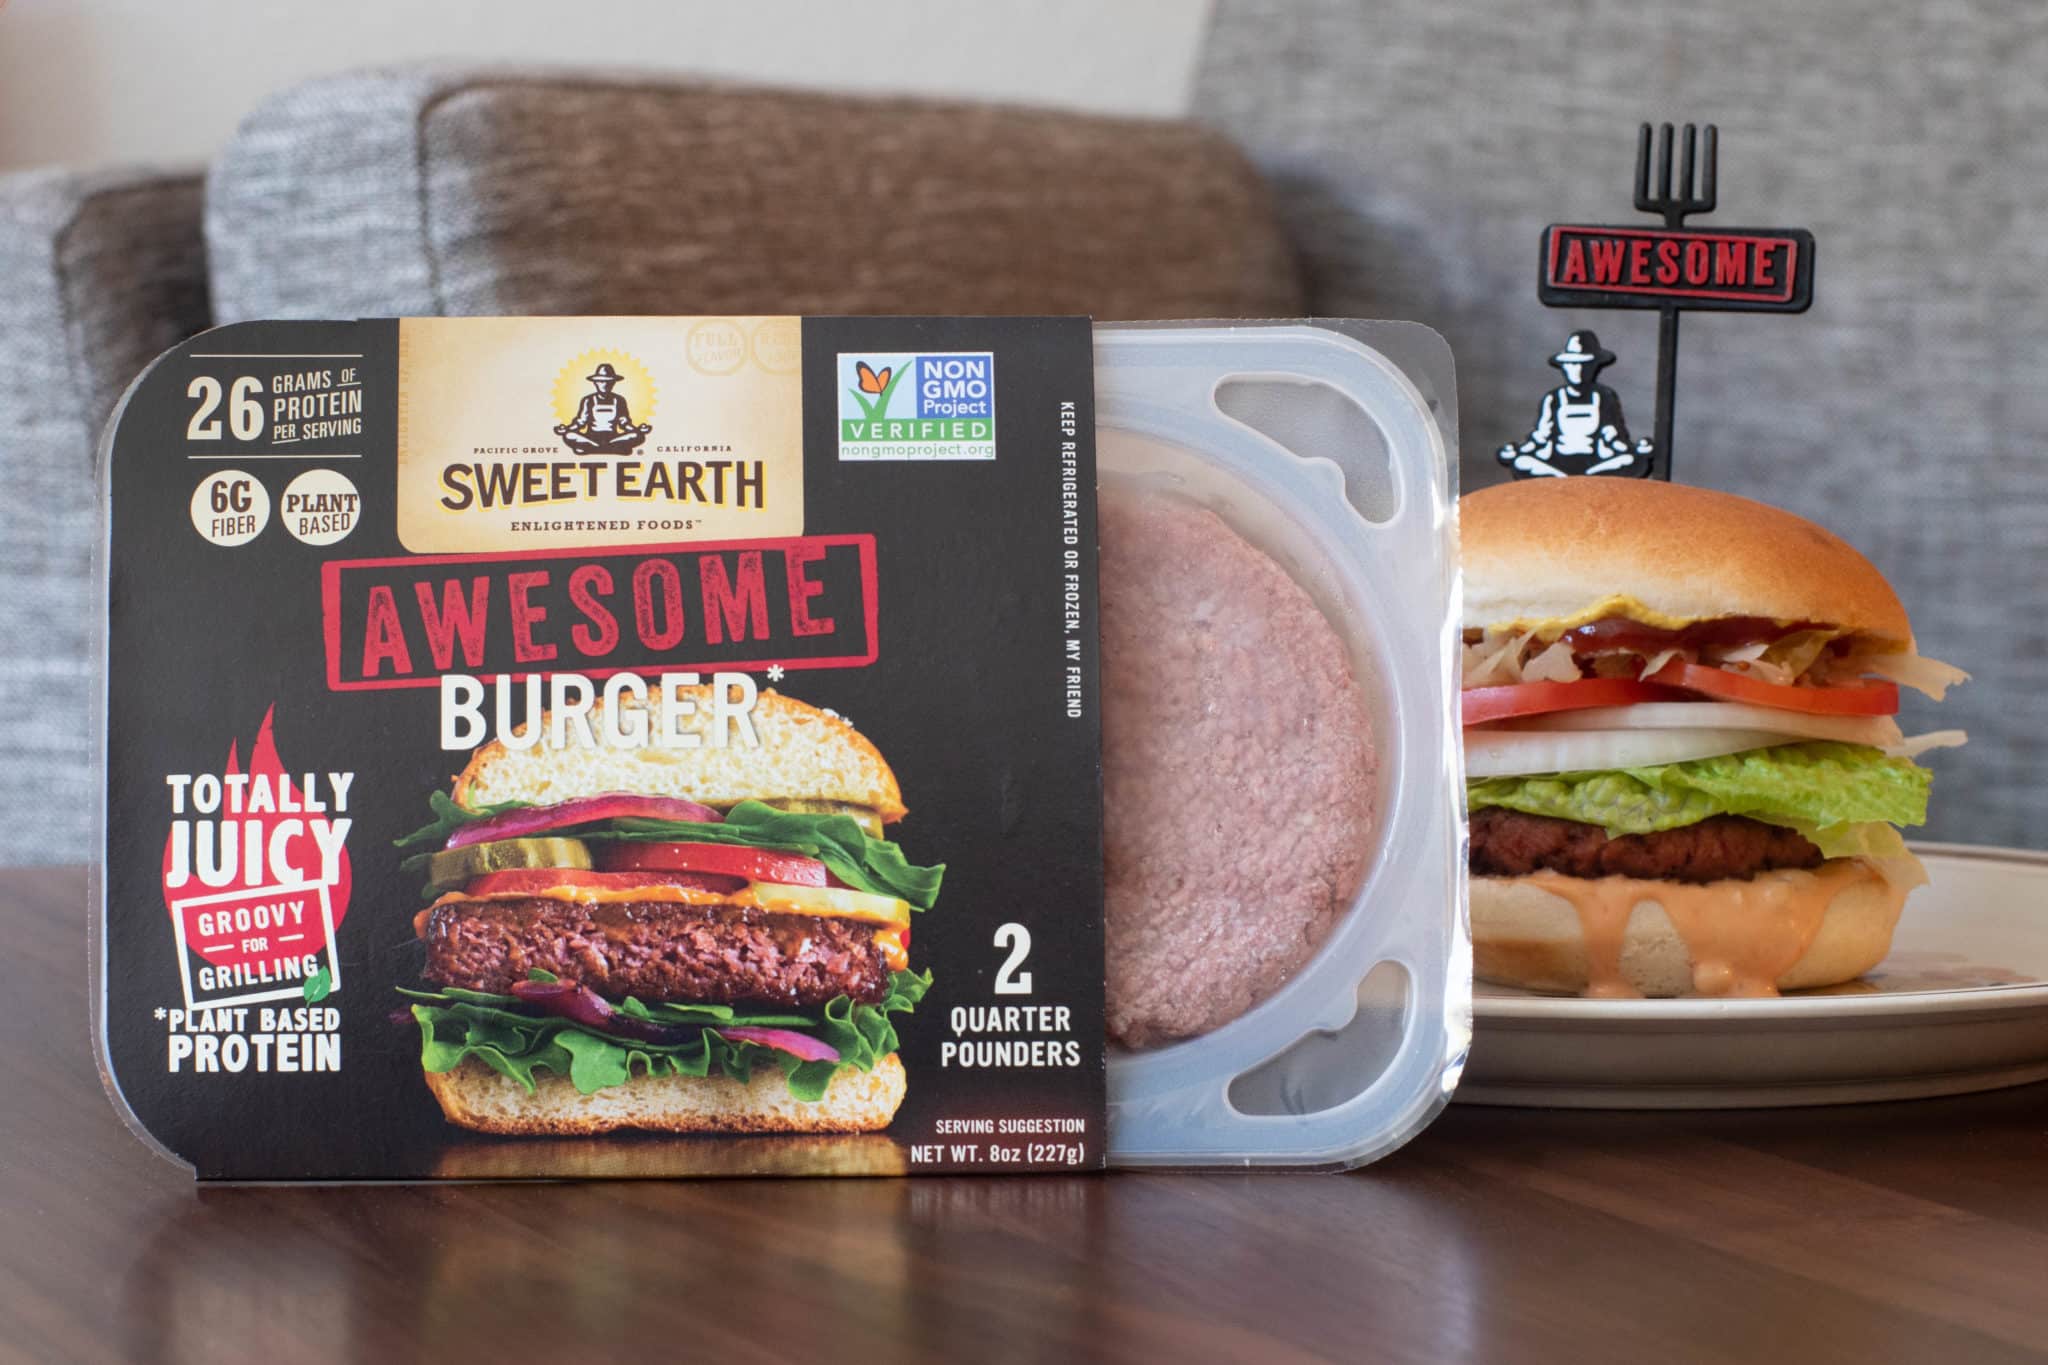 Trying the New Plant-Based Sweet Earth Awesome Burger! #AwesomeForAll